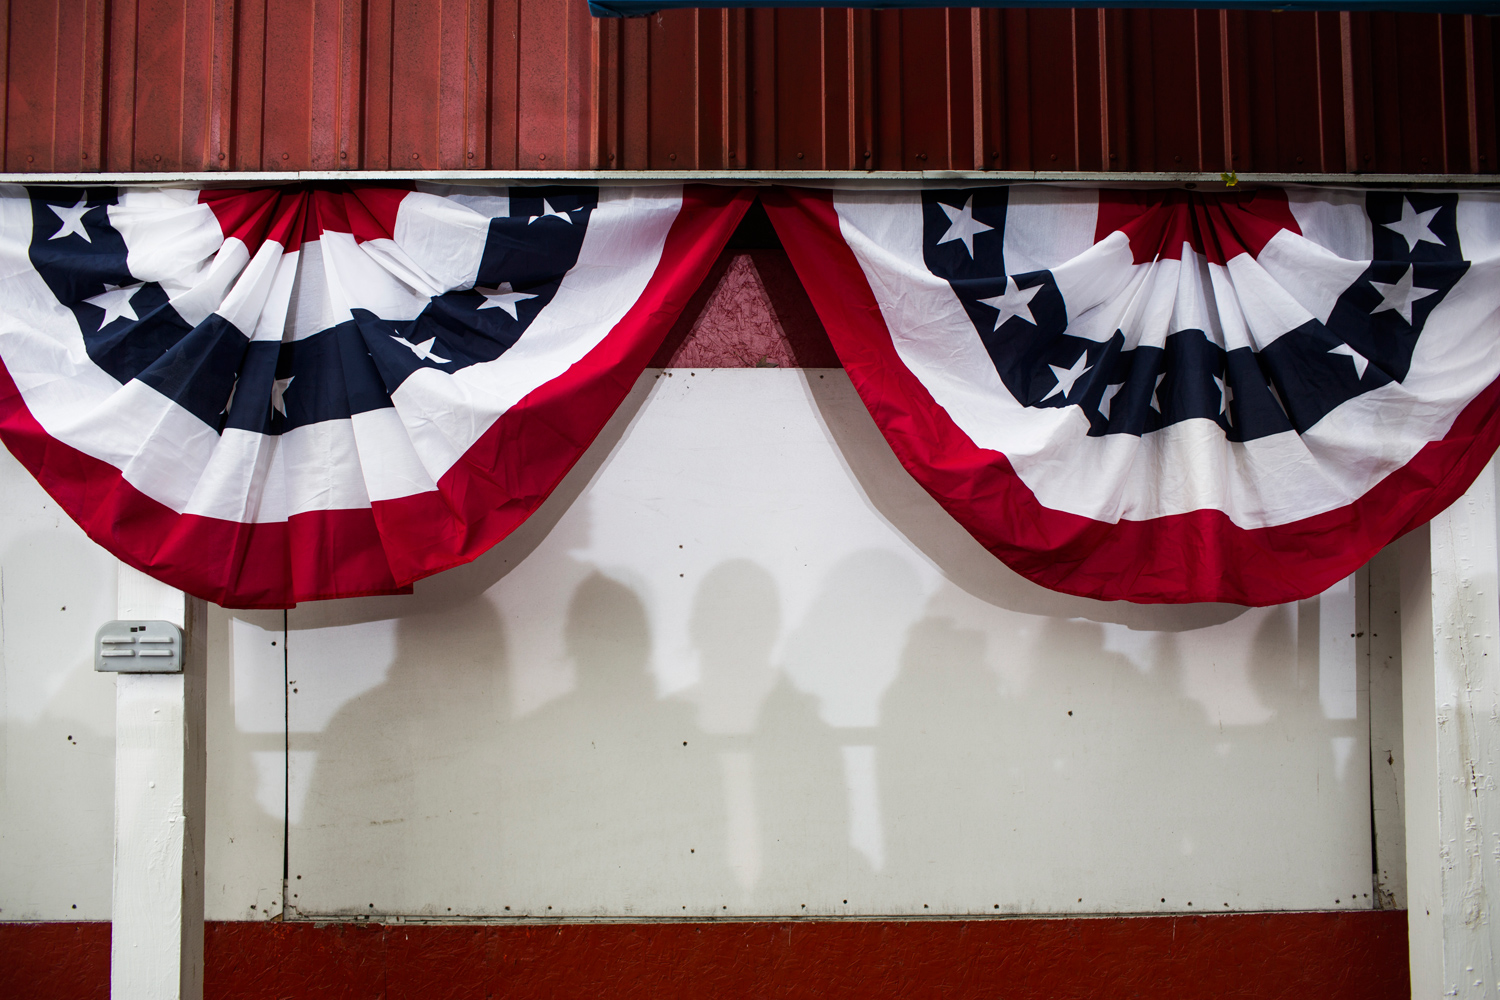 Oct. 24, 2012. Supporters are shadowed on a wall as President Obama attends a campaign rally in Davenport, Iowa.